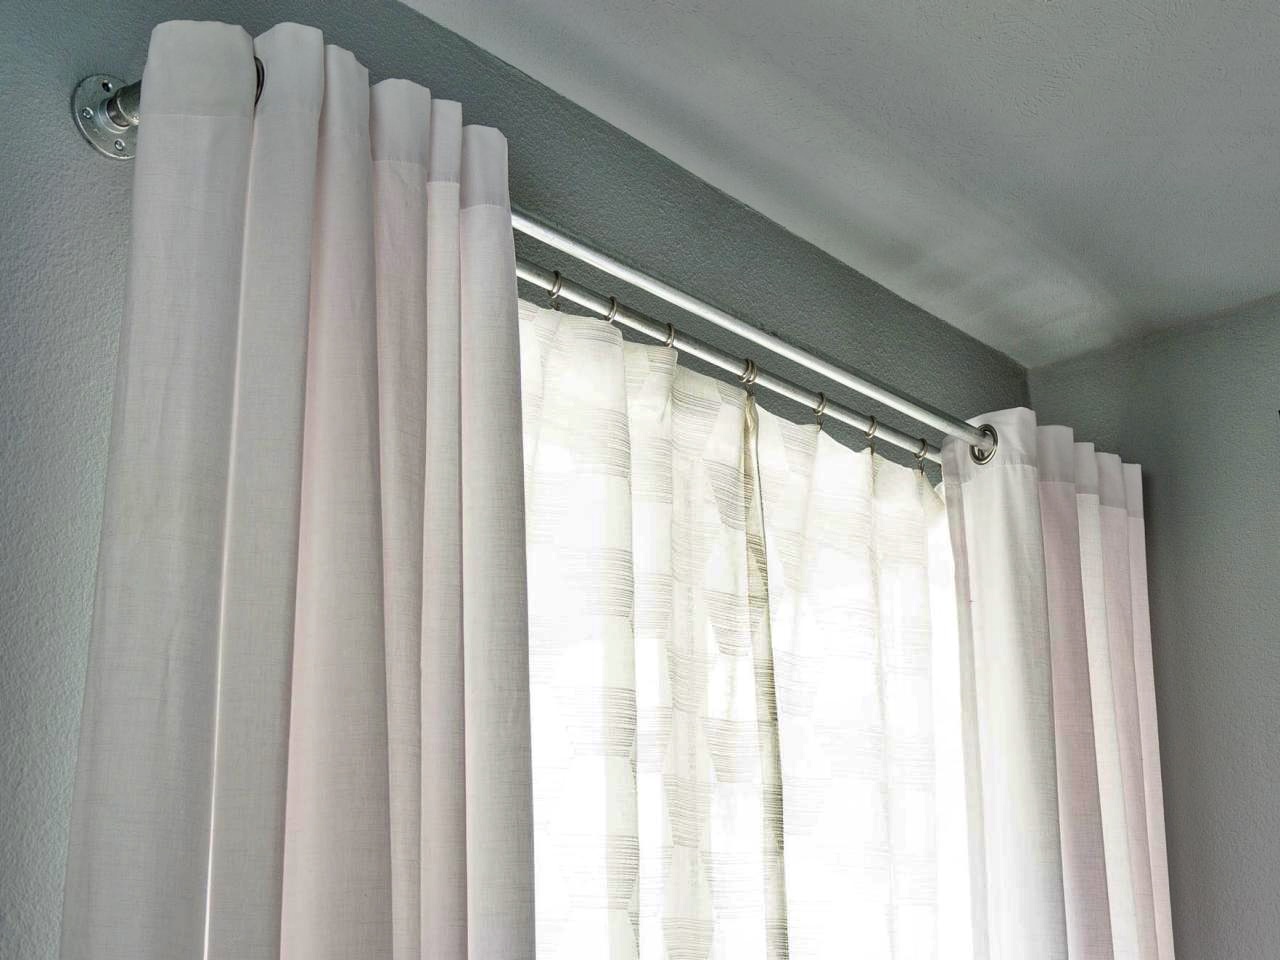 How To Put Two Curtain Rods Together